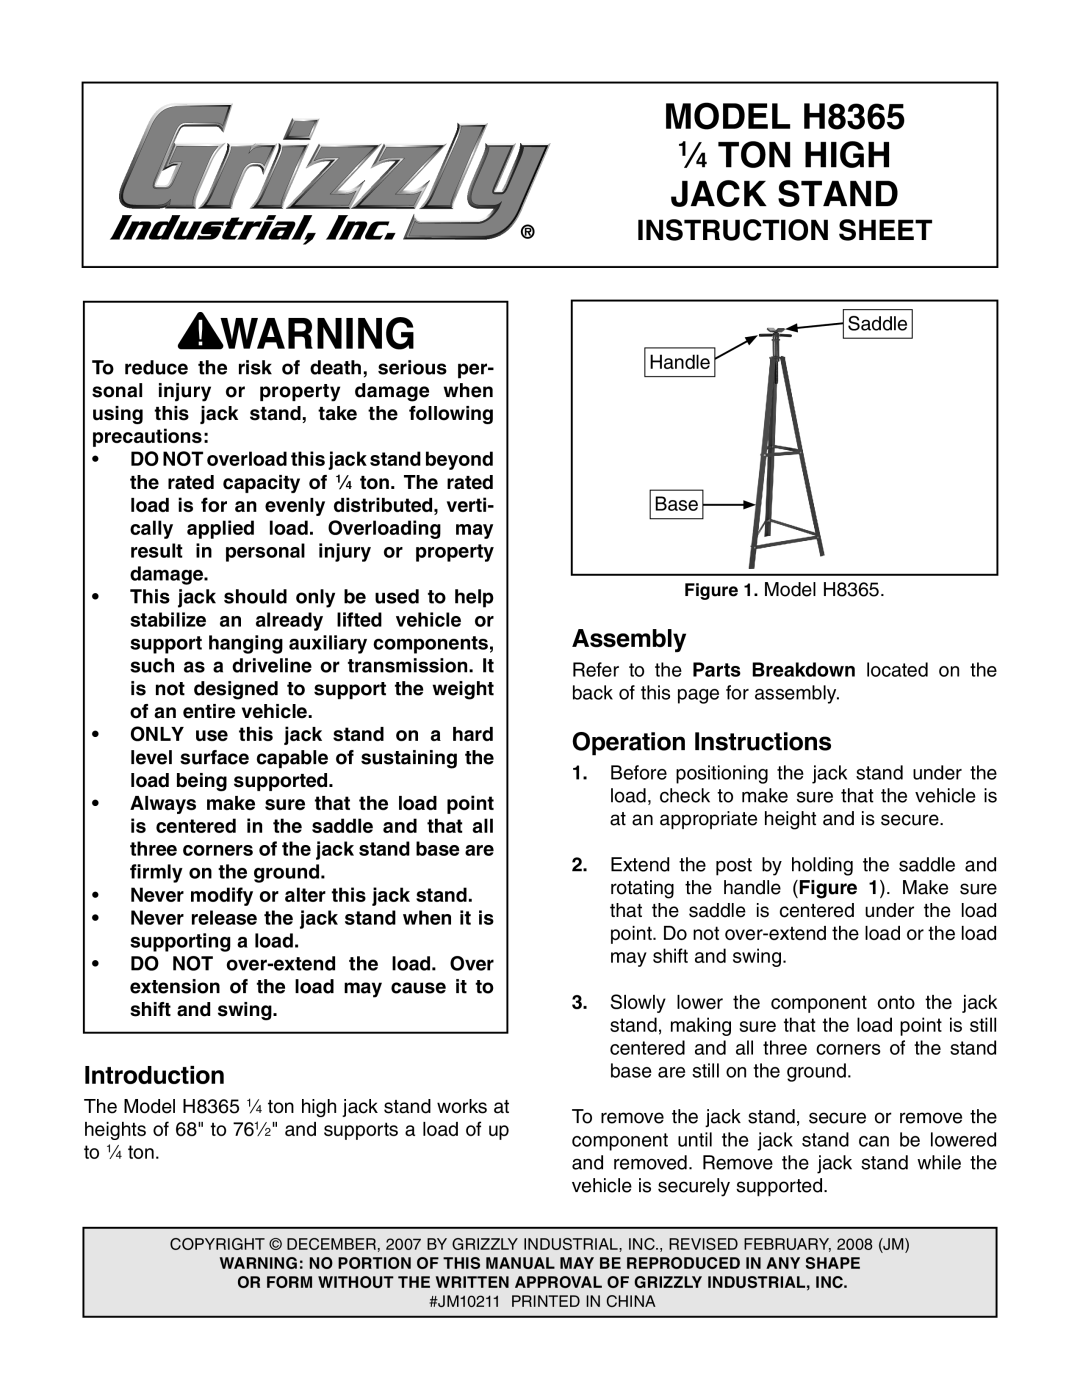 Grizzly instruction sheet 1⁄4 TON HIGH, MODEL H8365, Jack Stand, Instruction Sheet, Introduction, Assembly 